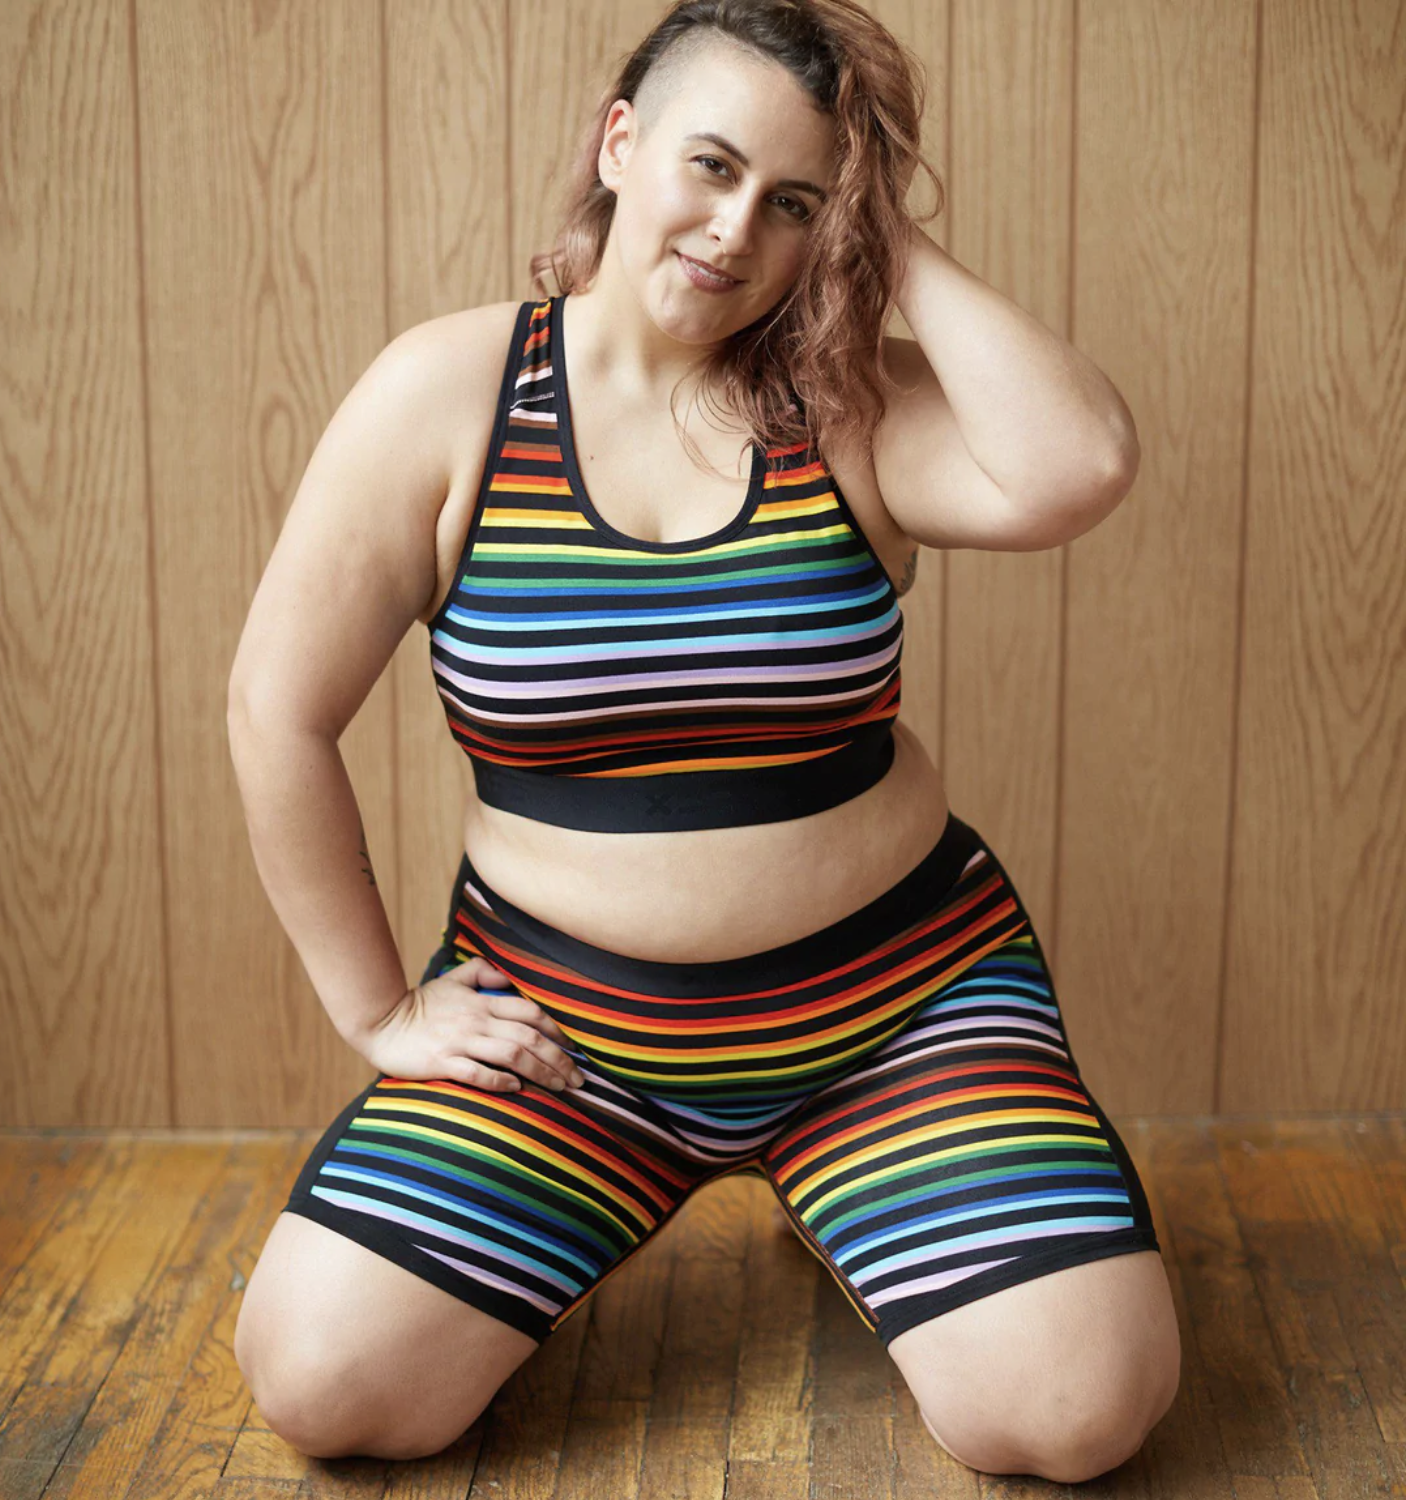 A model wearing rainbow comfy undies from TomBoyX